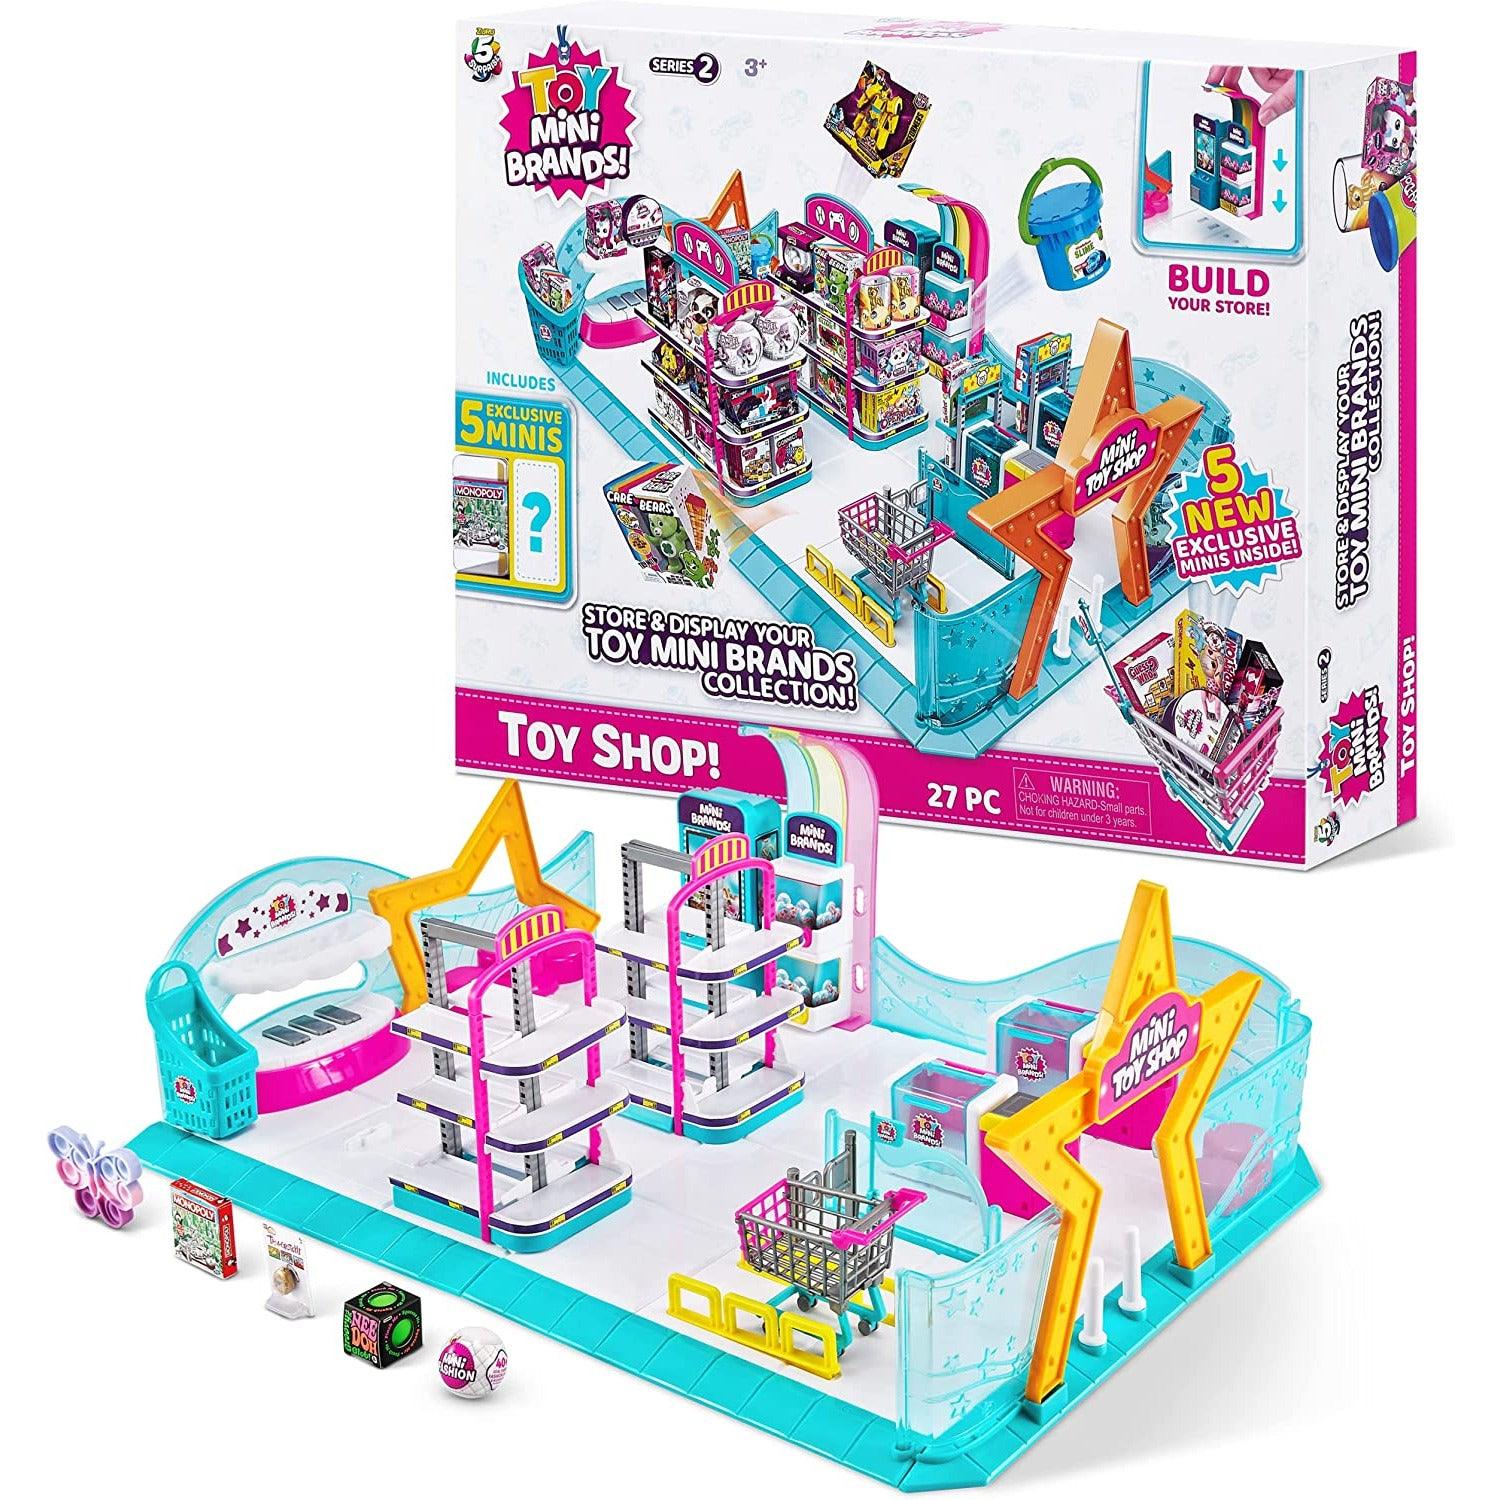 5 Surprise Toy Mini Brands - Mini Toy Shop Playset by ZURU (Series 2) - BumbleToys - 5-7 Years, 8-13 Years, collectible, collectors, Girls, Miniature Dolls & Accessories, OXE, Pre-Order